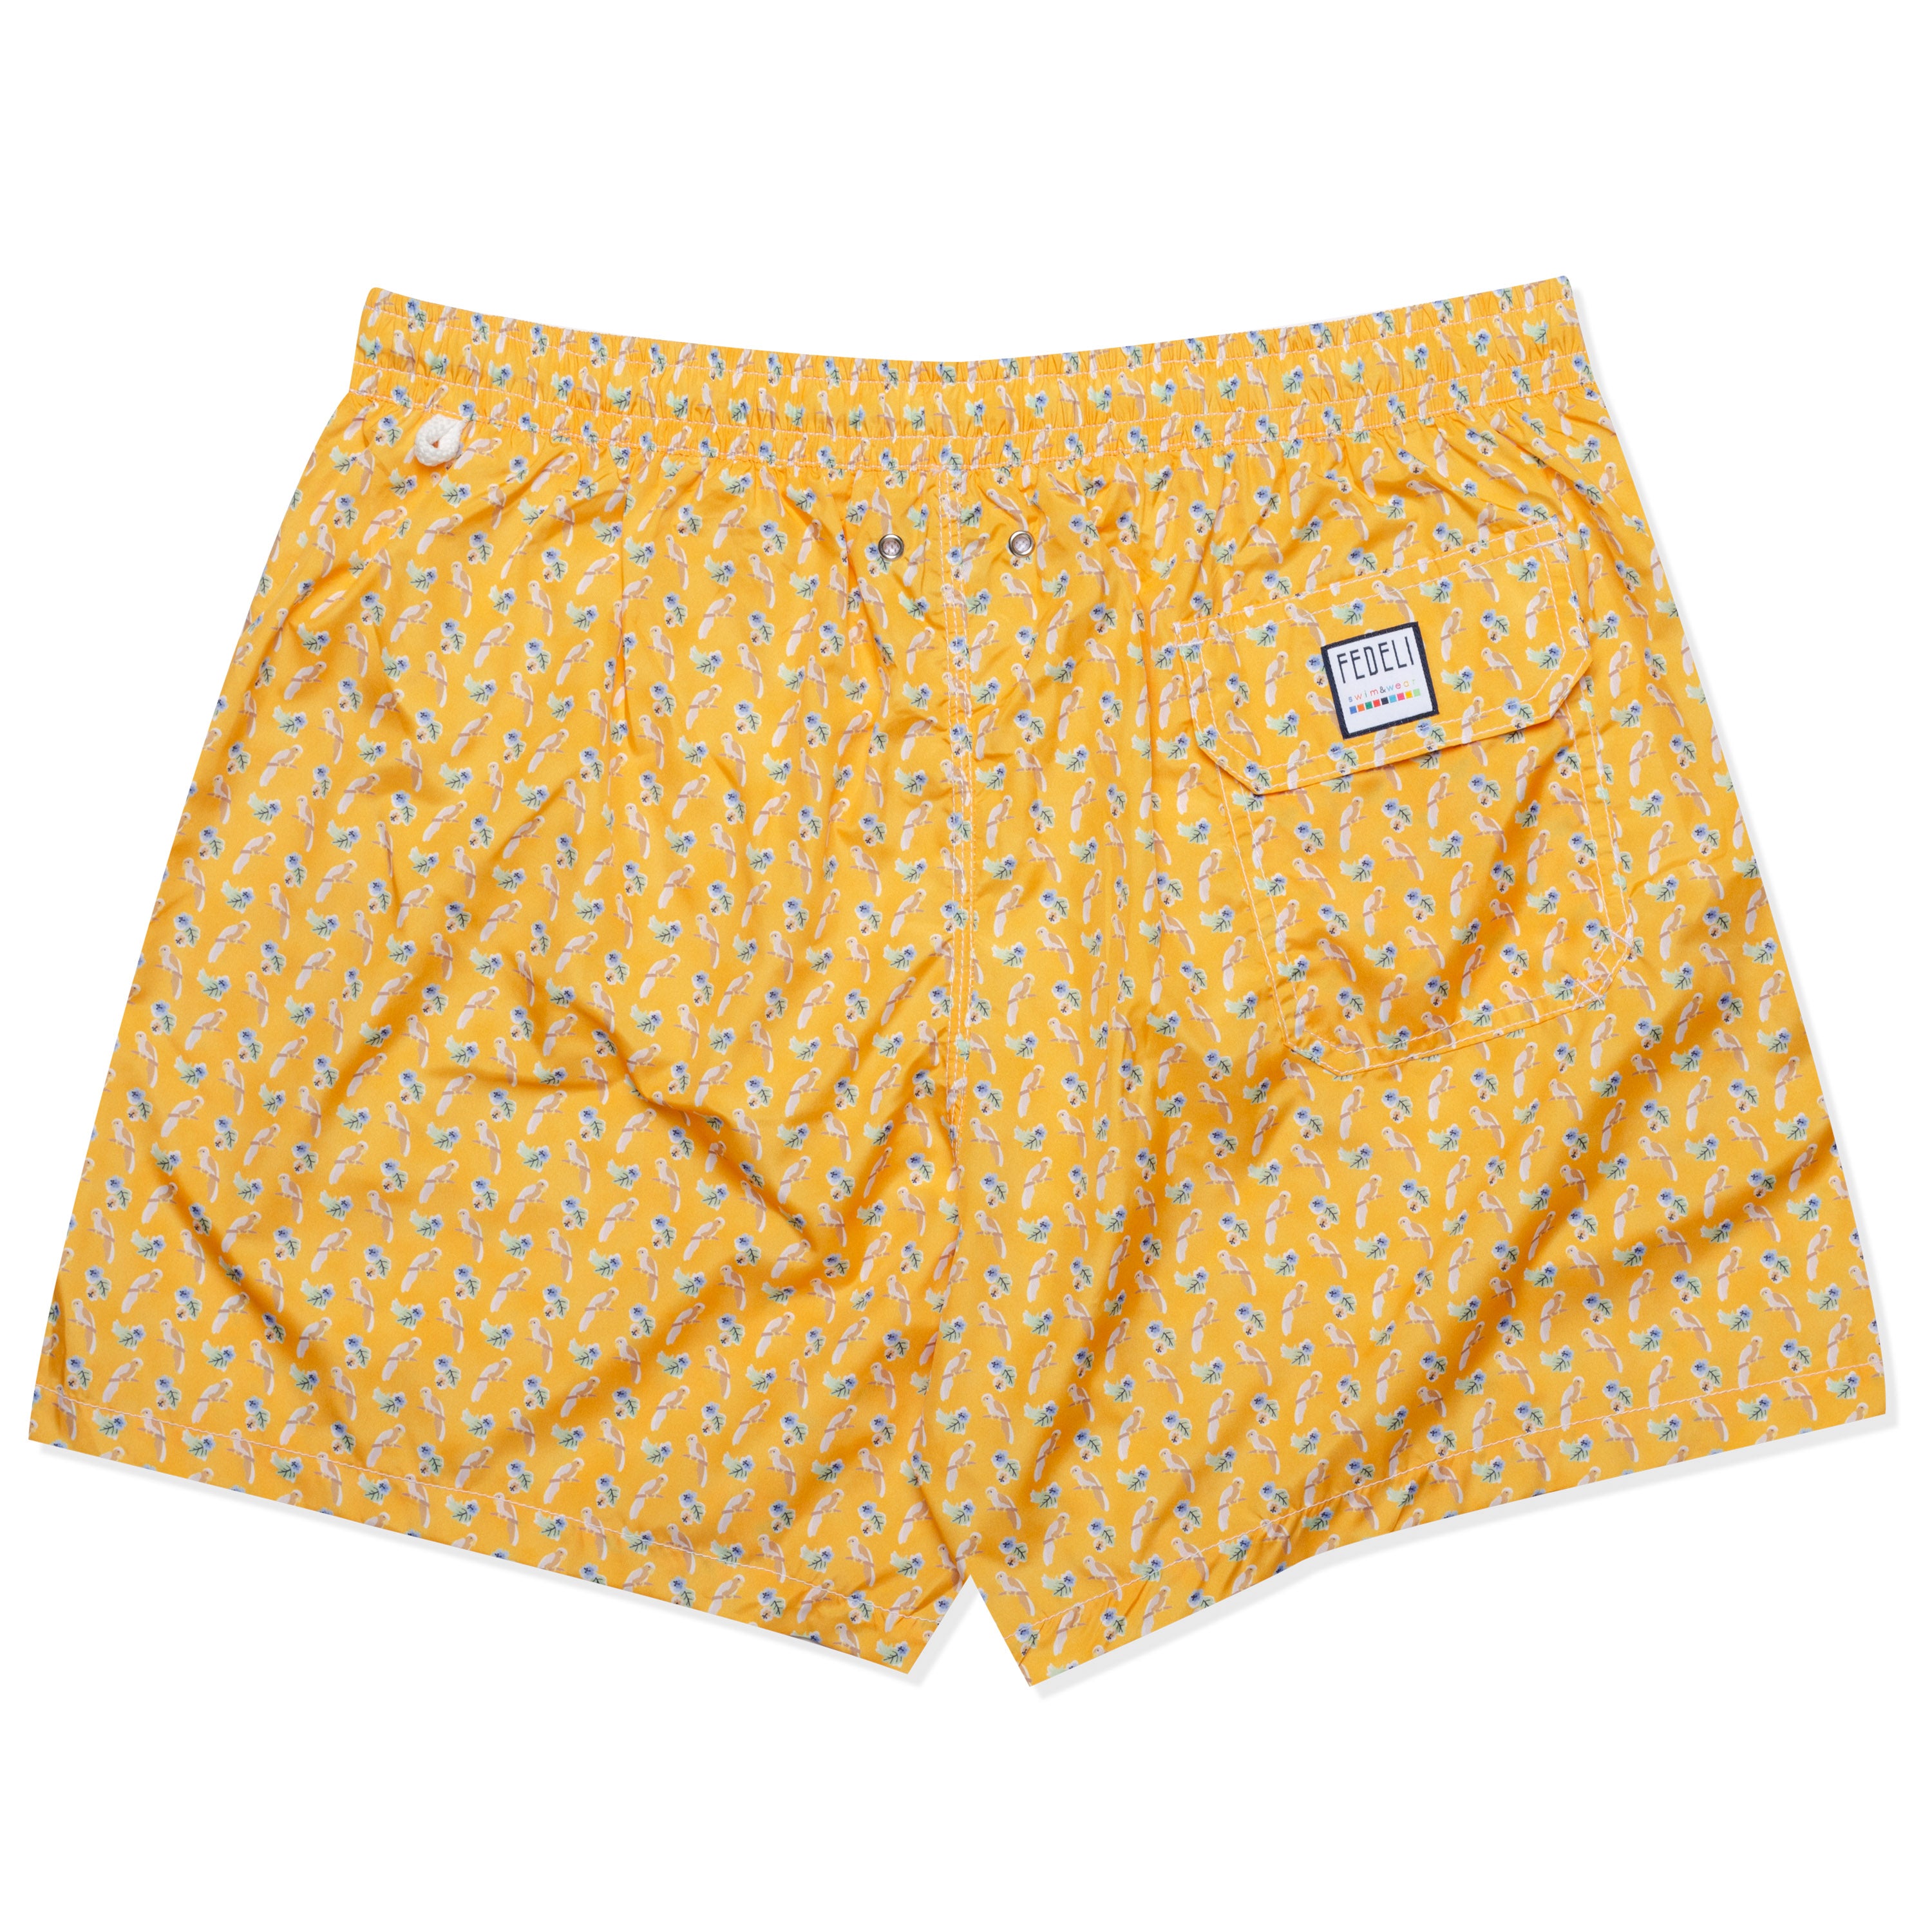 FEDELI Italy Yellow Bird Floral Madeira Airstop Swim Shorts Trunks NEW 2XL